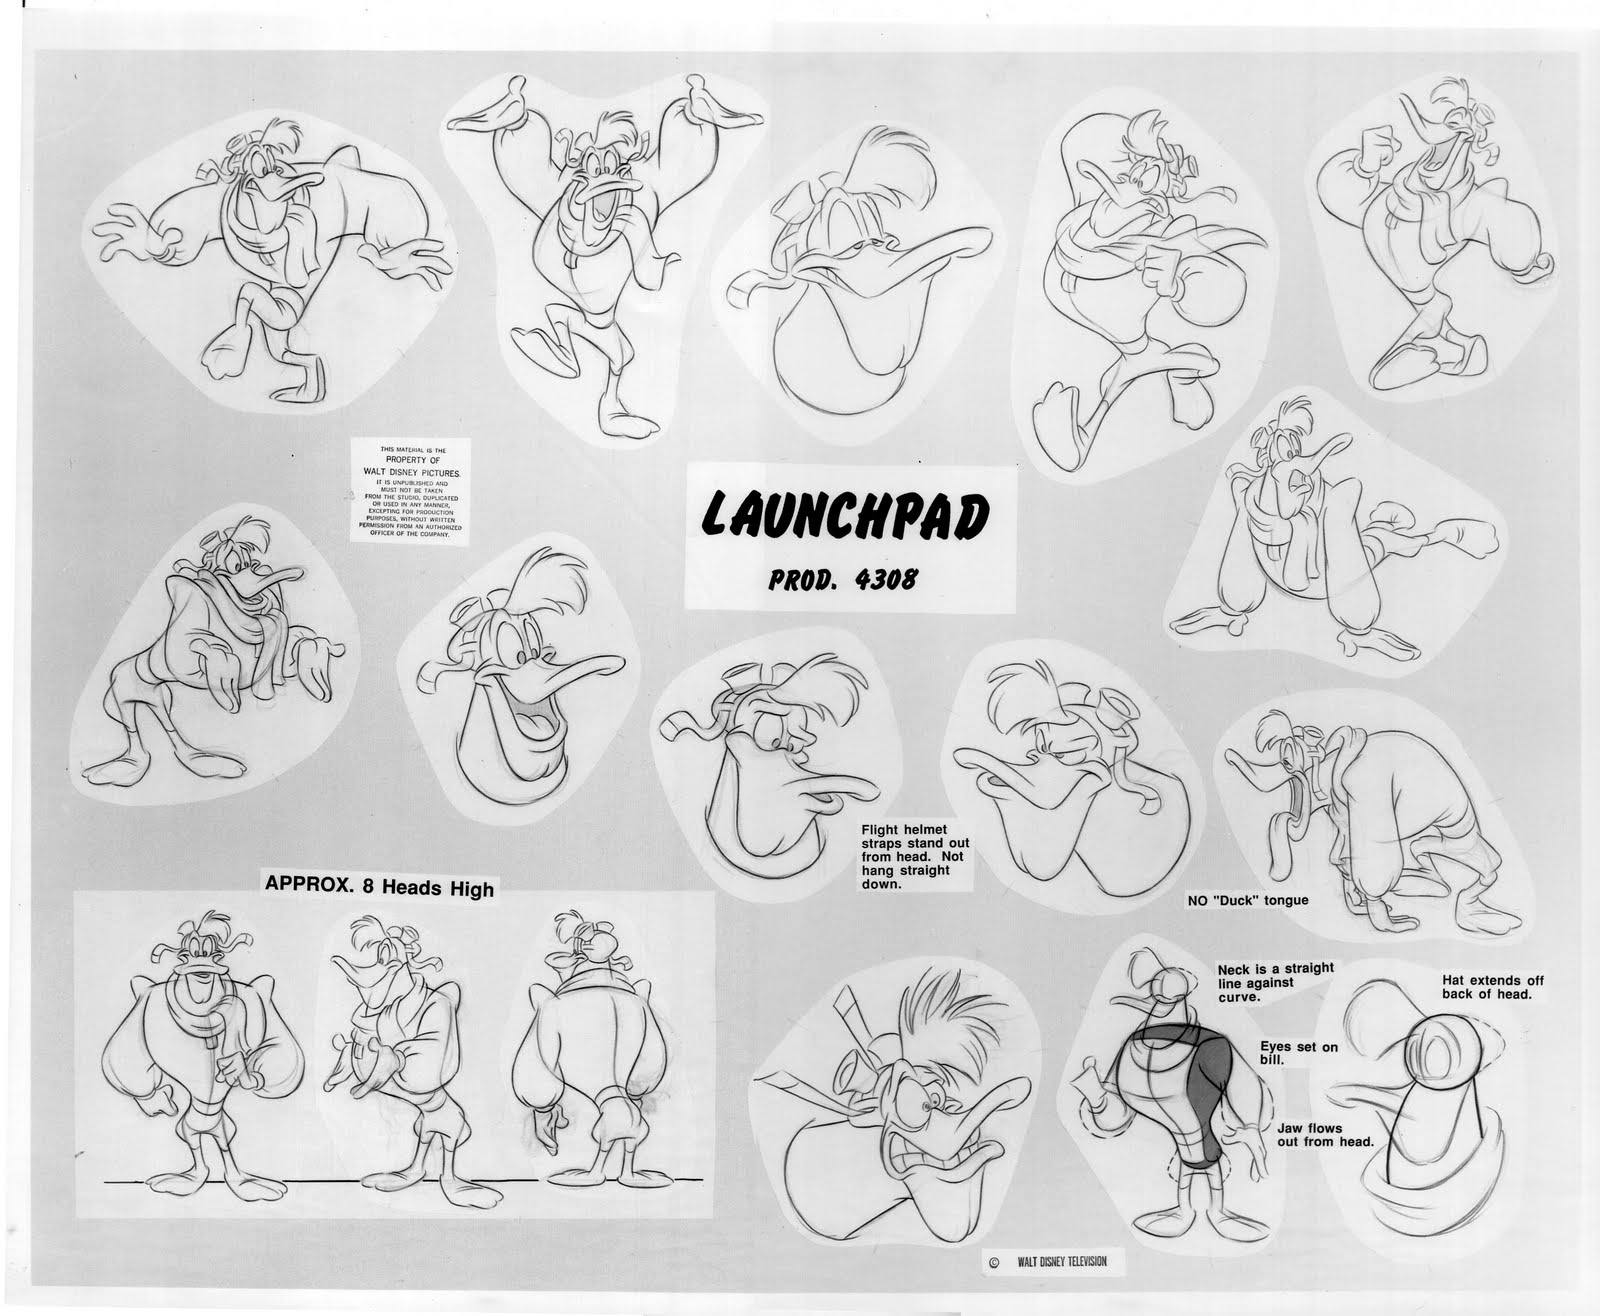 Launchpad from "Darkwing Duck", 1991